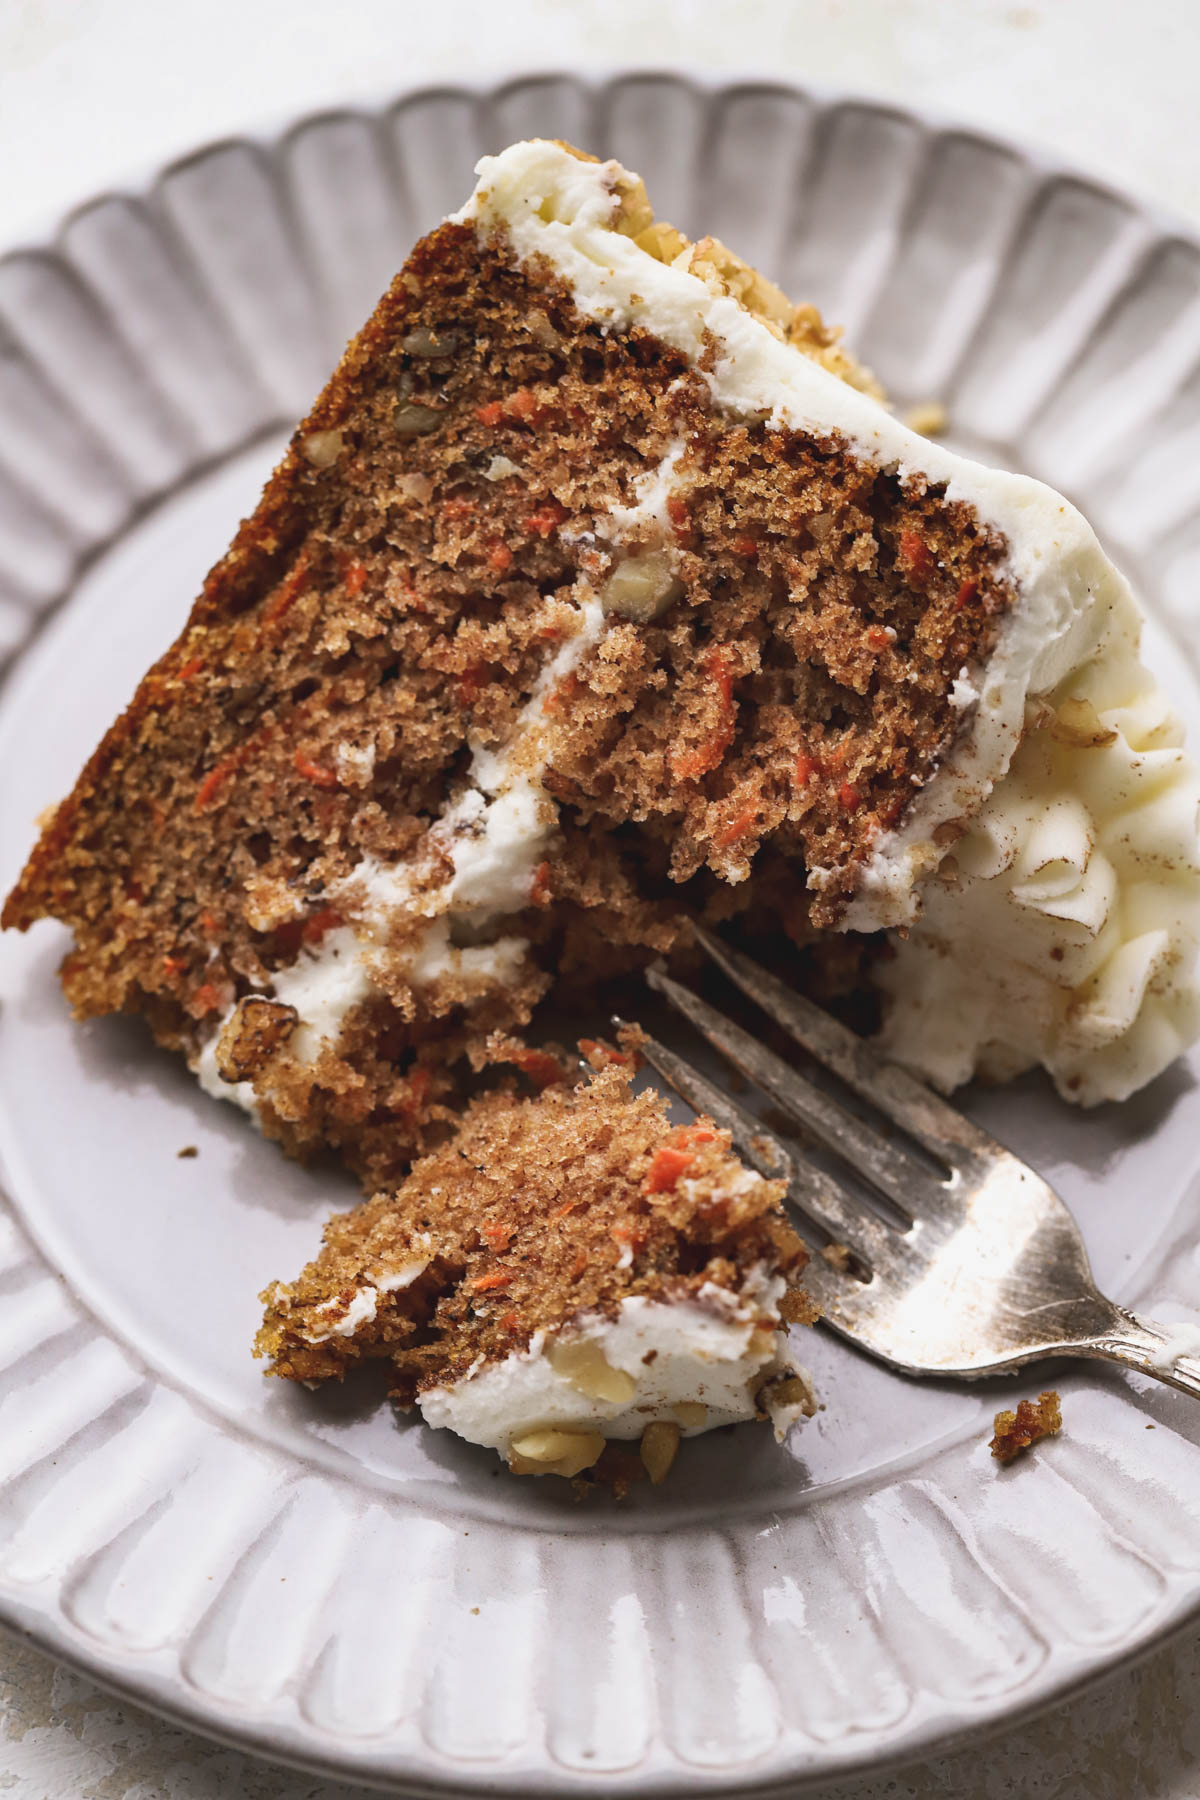 Slice of carrot cake with walnuts and cream cheese frosting.  